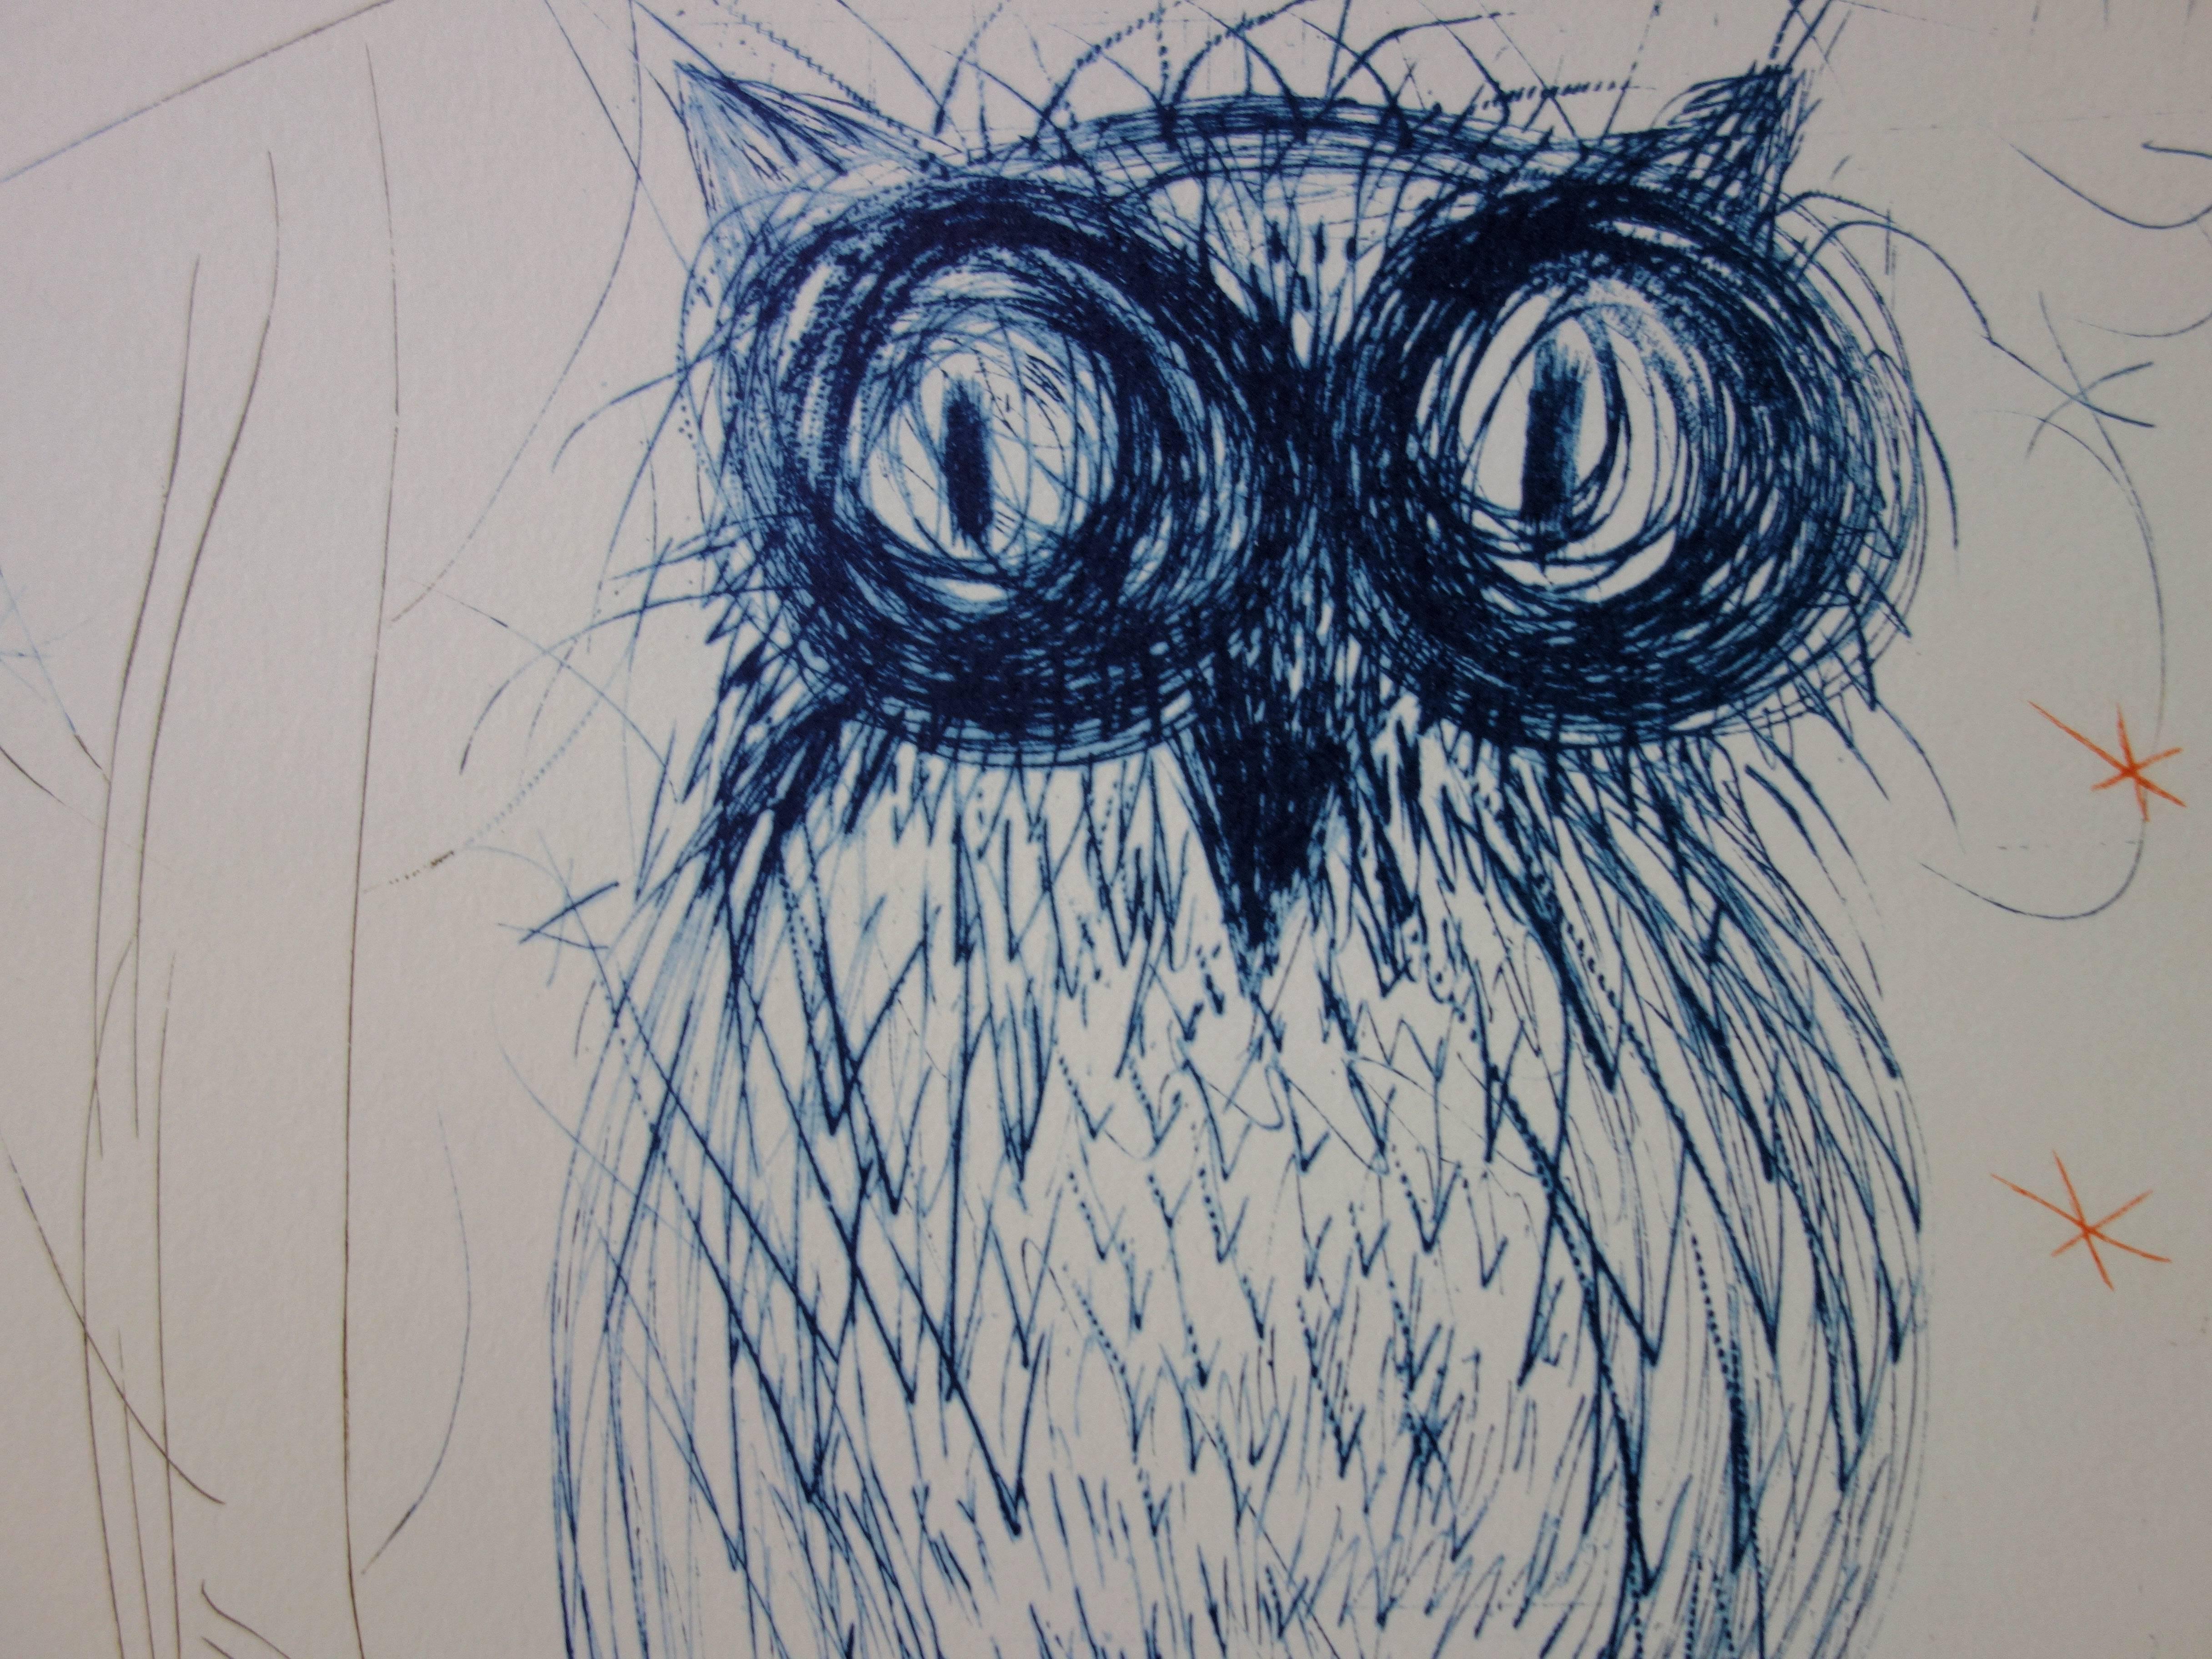 The Blue Owl - Lithograph - Edited by J. Schneider, 1983 - Surrealist Print by (after) Salvador Dali